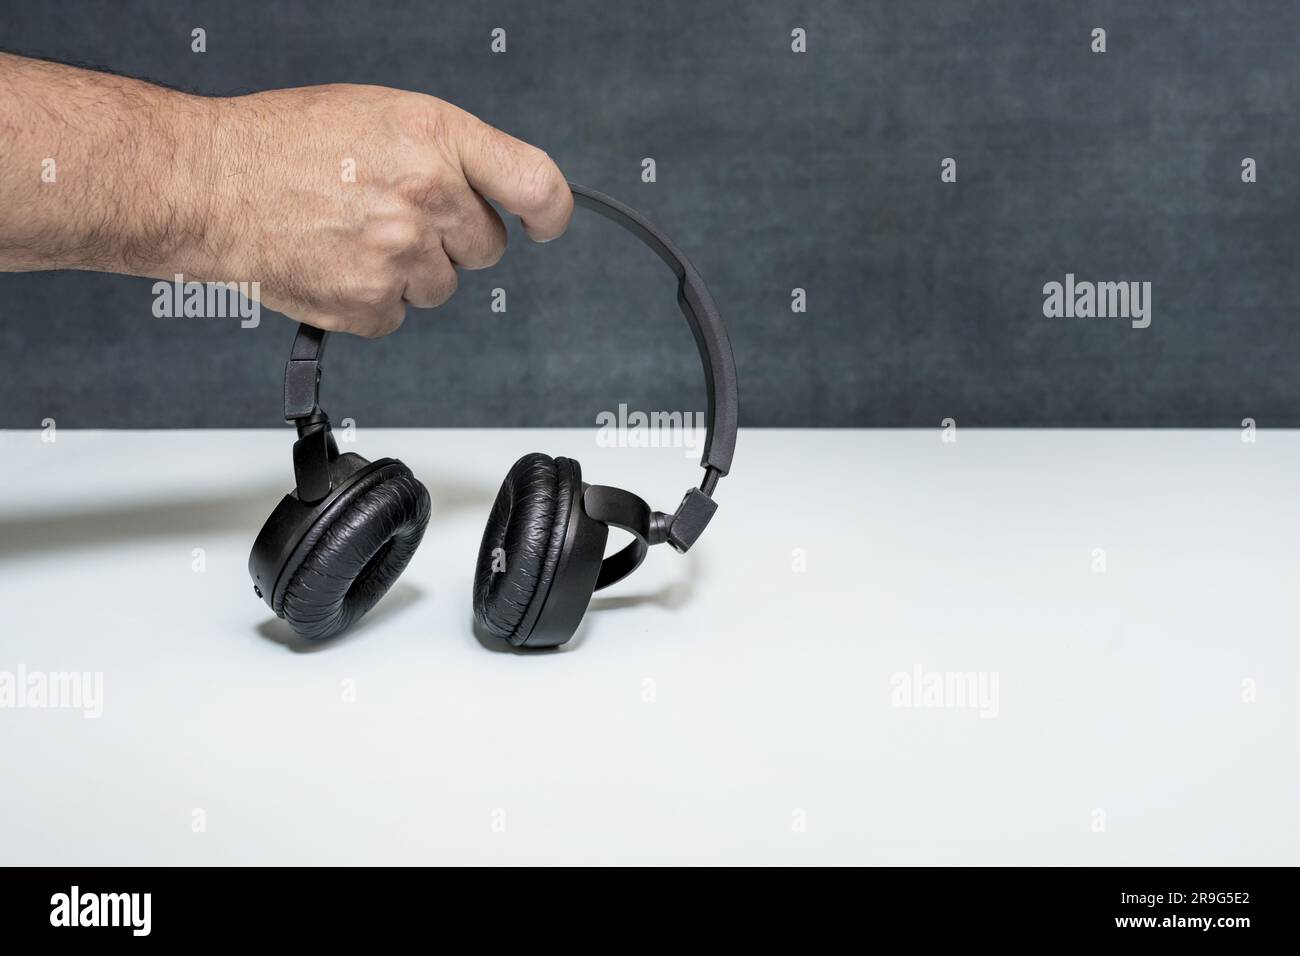 A hand holding a black over-ear wireless headphones Stock Photo